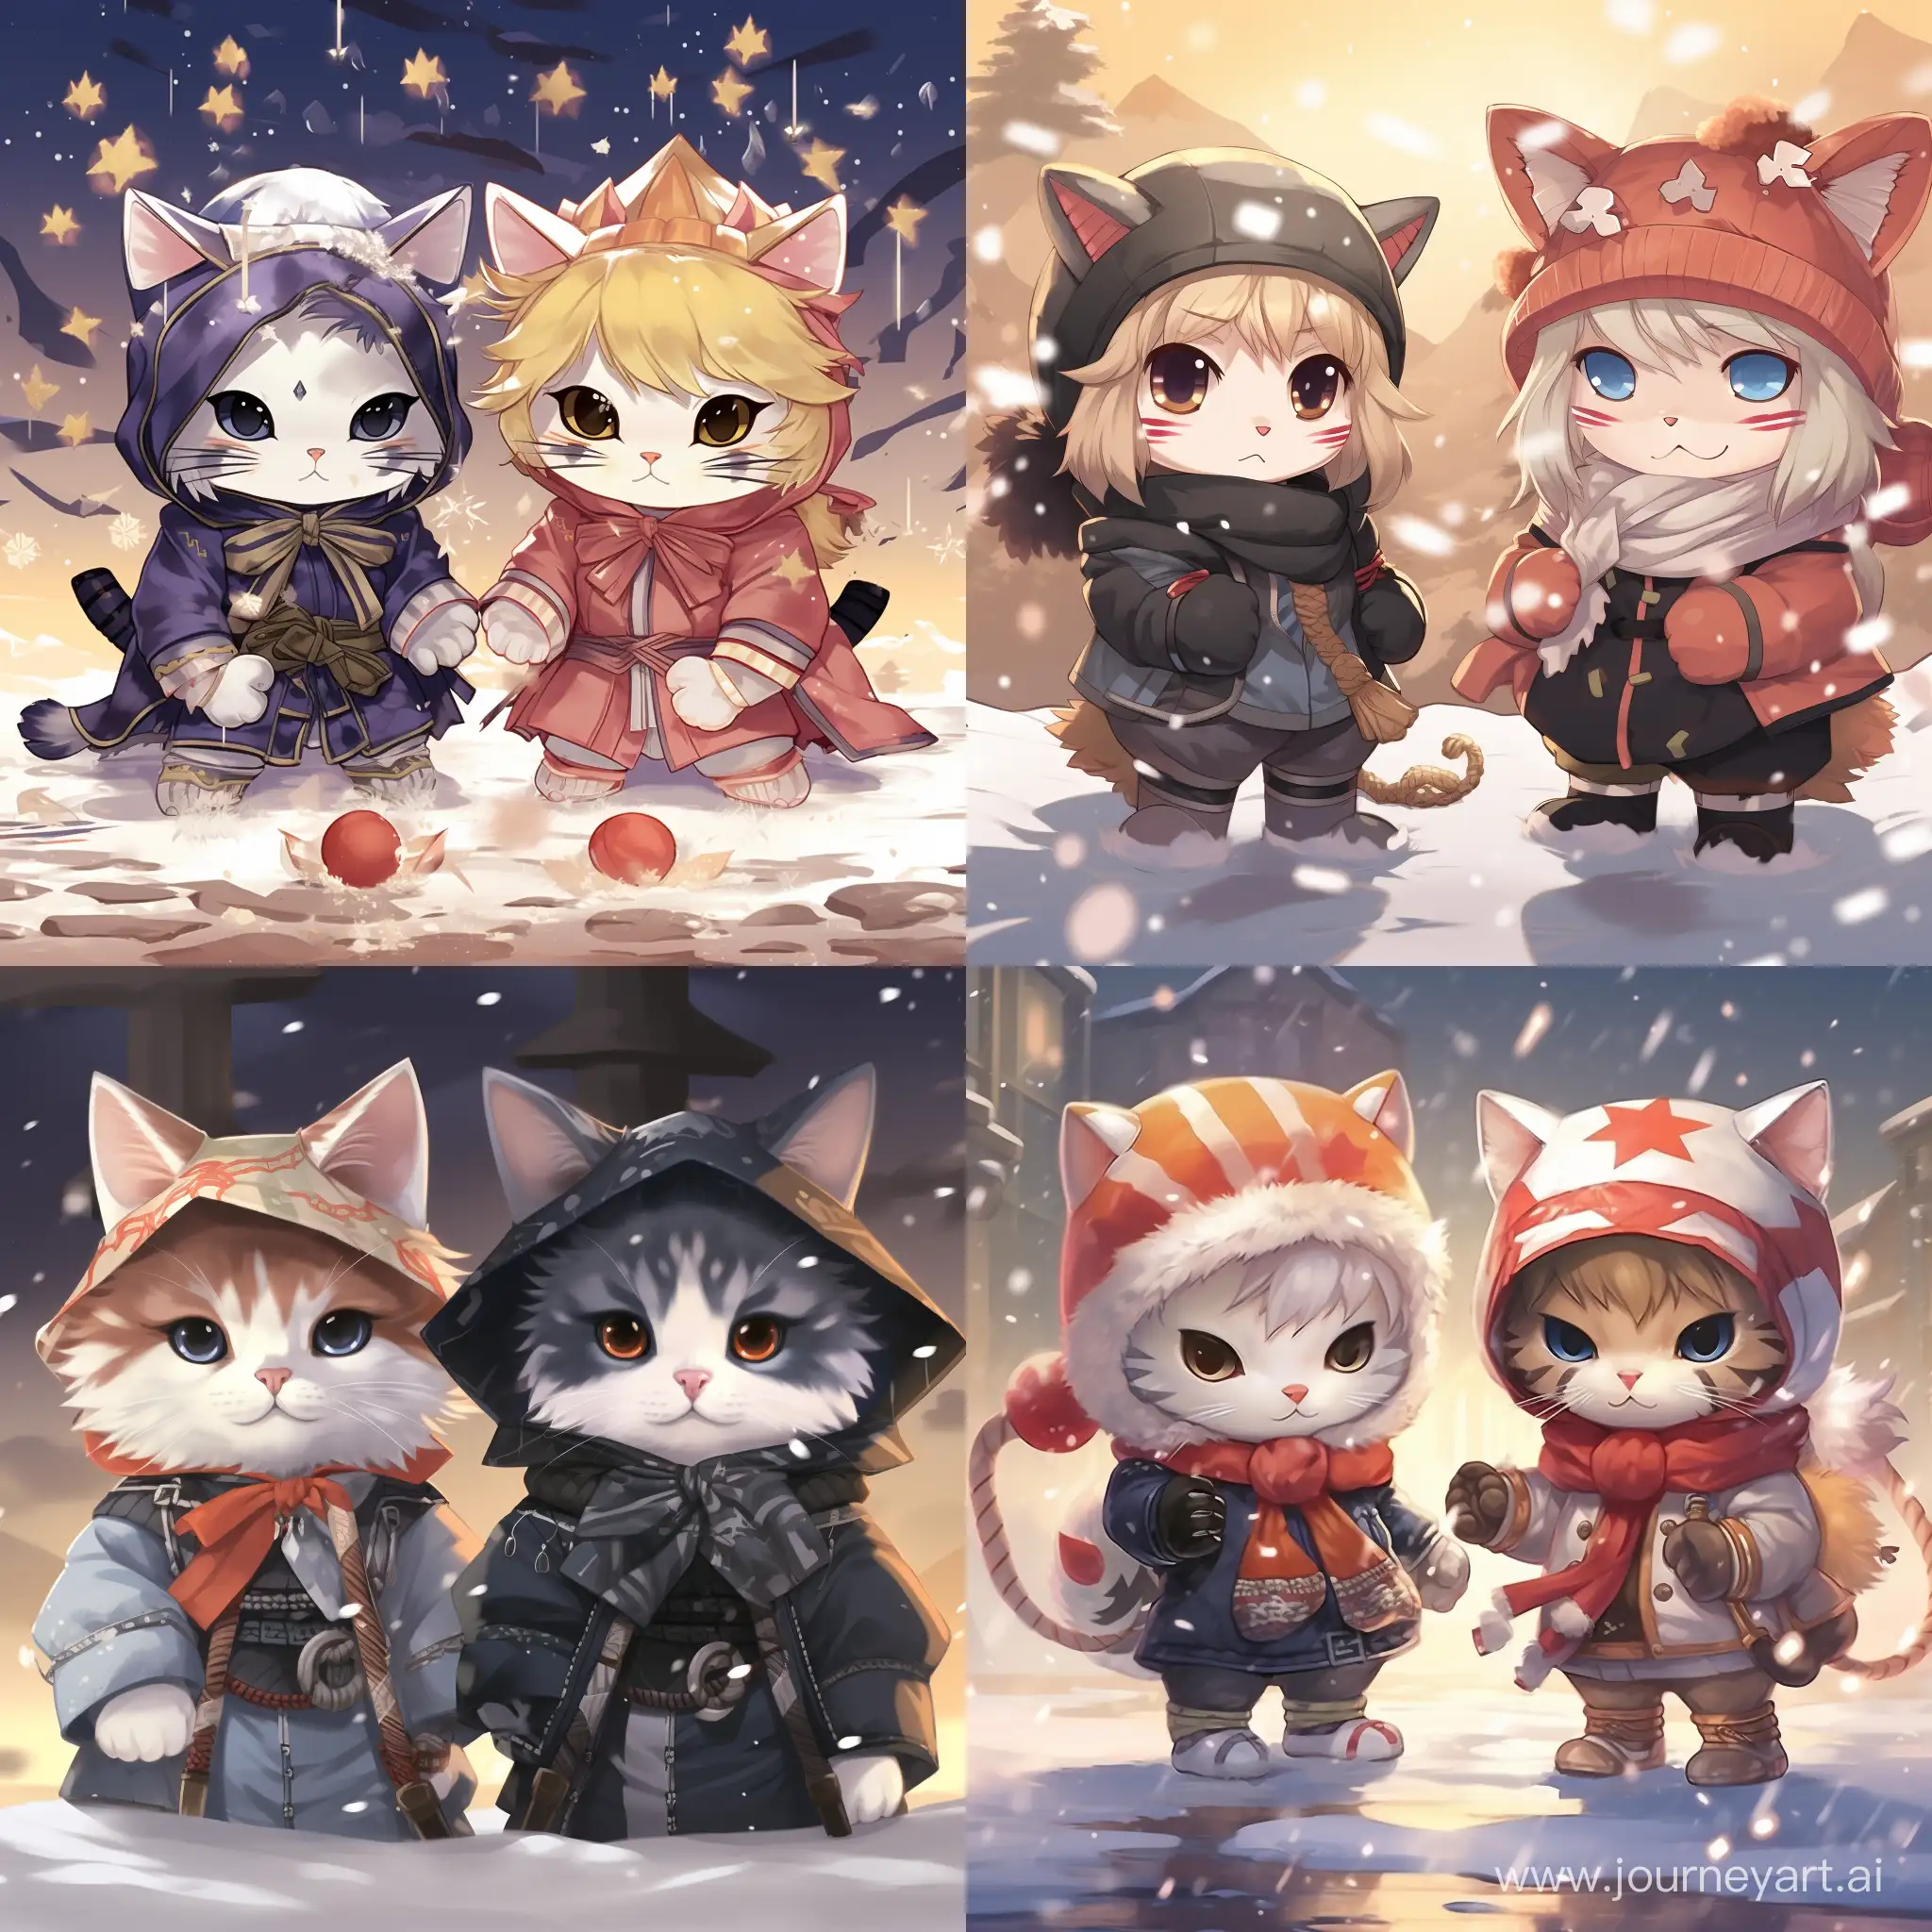 Adorable-Anime-Kittens-in-Magical-Battle-New-Years-Attire-Under-Snowfall